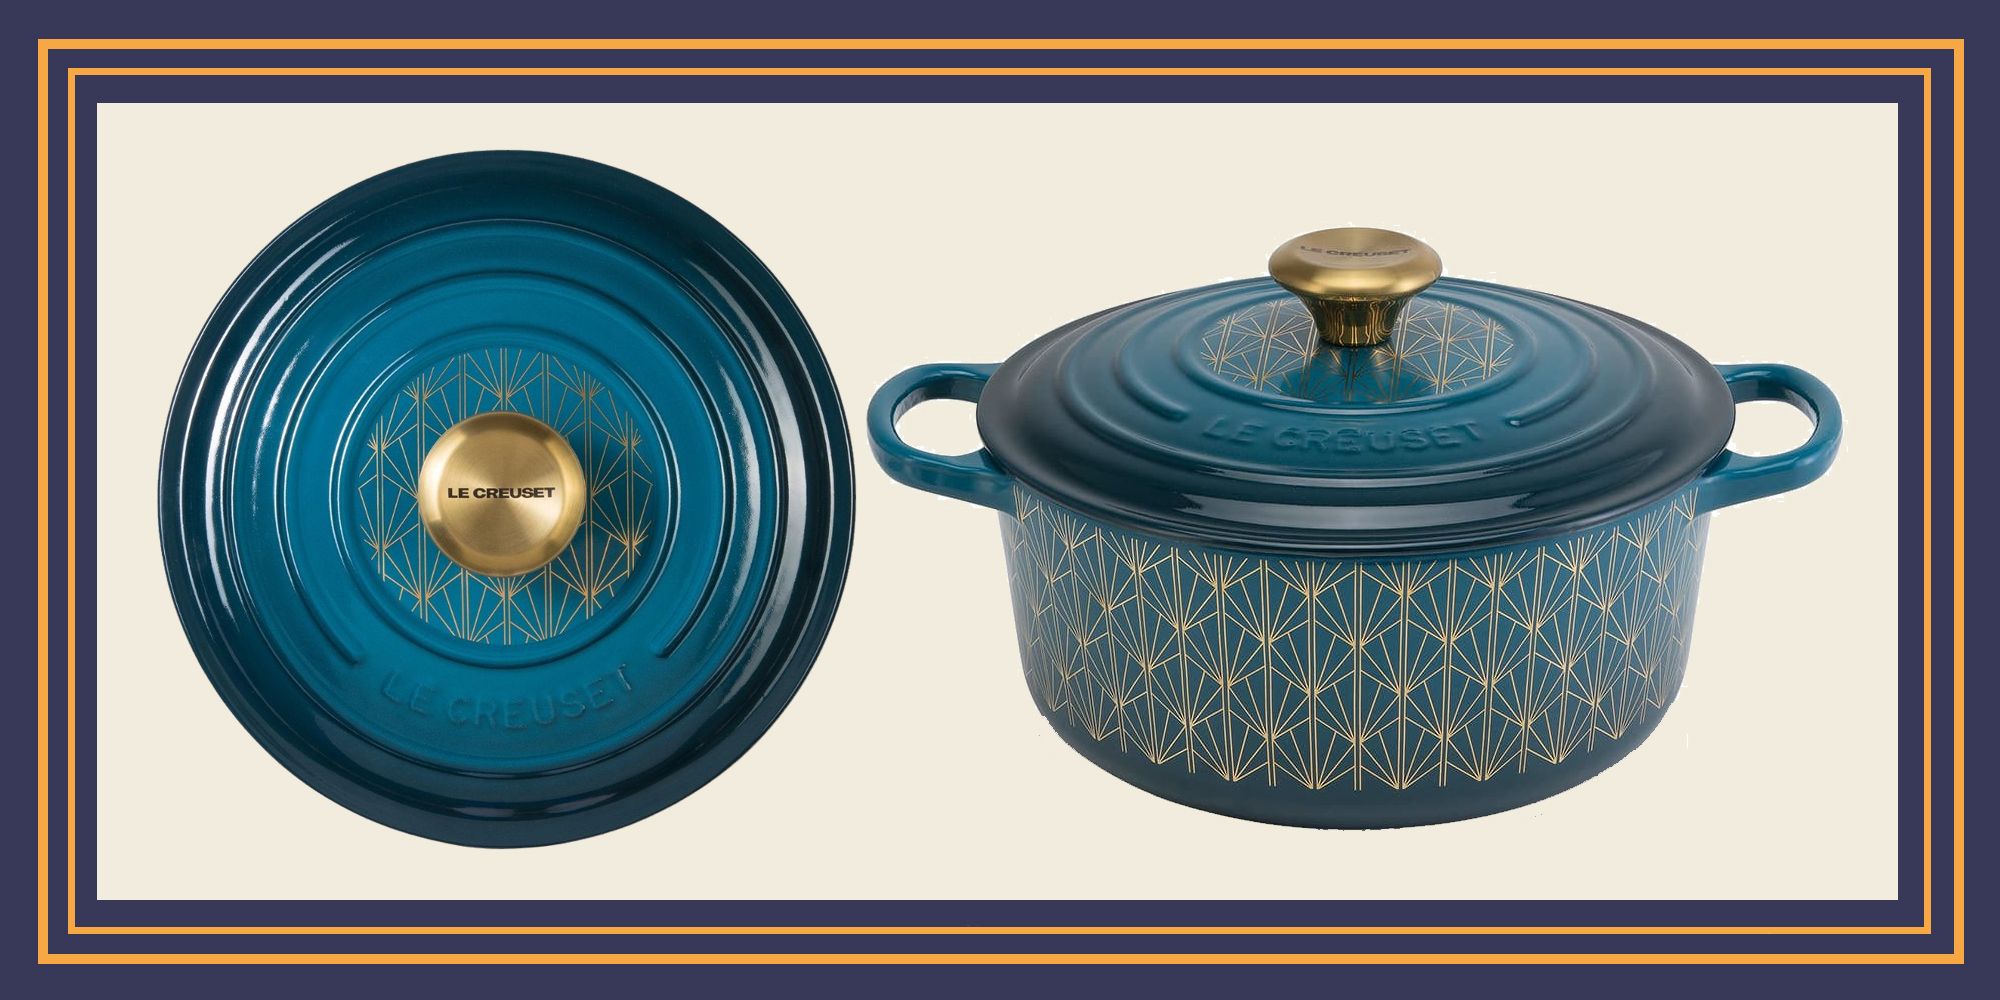 New Le Creuset Casserole With Is On Sale